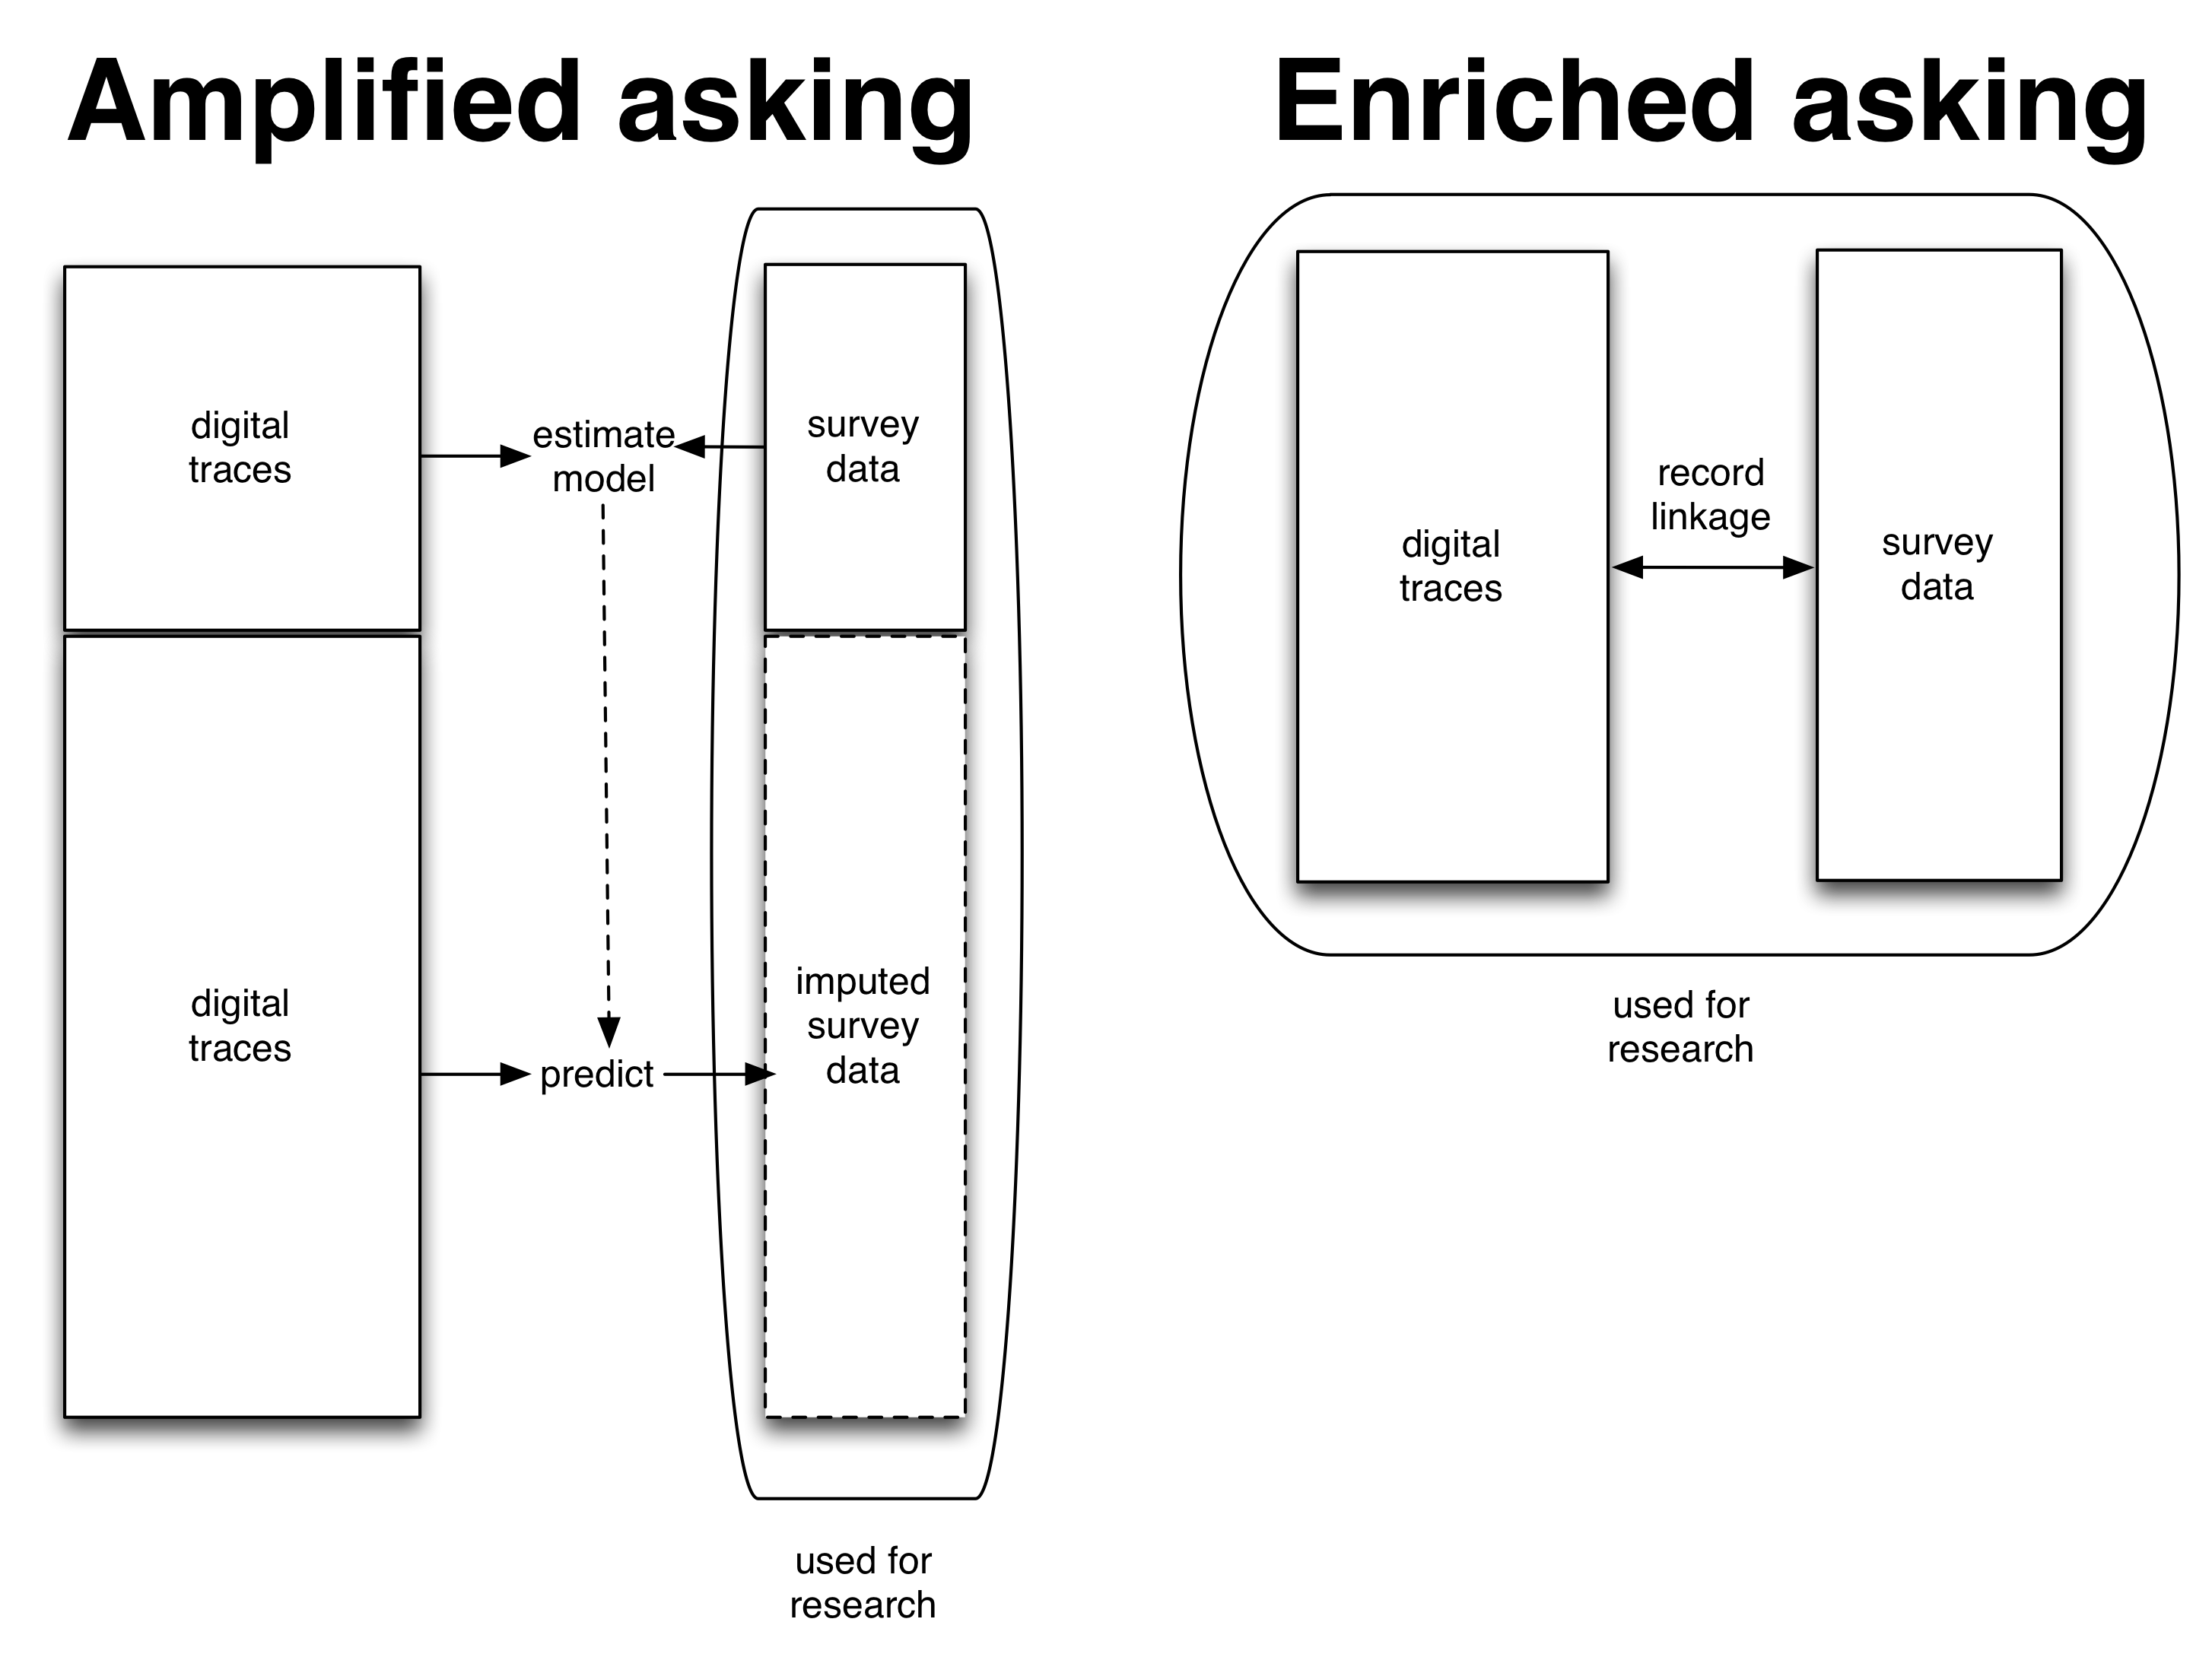 Figure 3.10: Two main ways to combine digital traces and survey data. In amplified asking (Section 3.6.1) the digital traces are used to amplify the survey data. In enriched asking (Section 3.6.2) the digital traces actually have a core measure of interest and the survey data builds the necessary context around it.